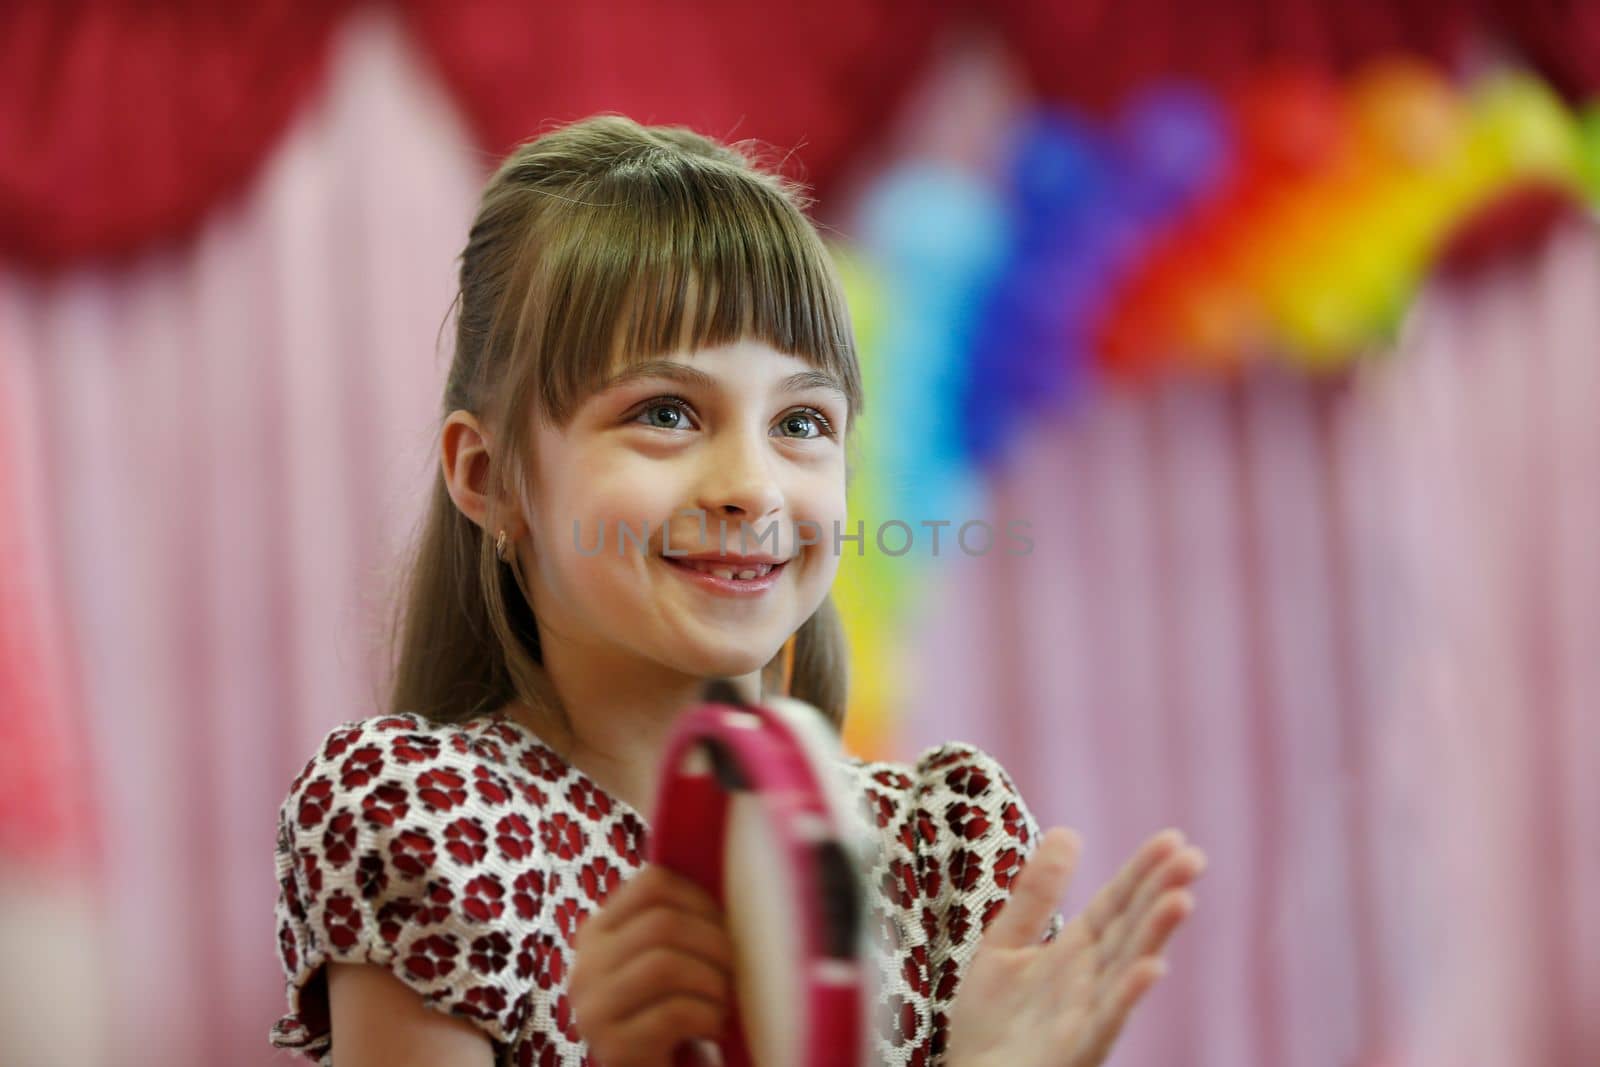 Belarus, city of Gomil, May 16, 2019. Morning in kindergarten.Portrait of a happy little girl at a children's party.